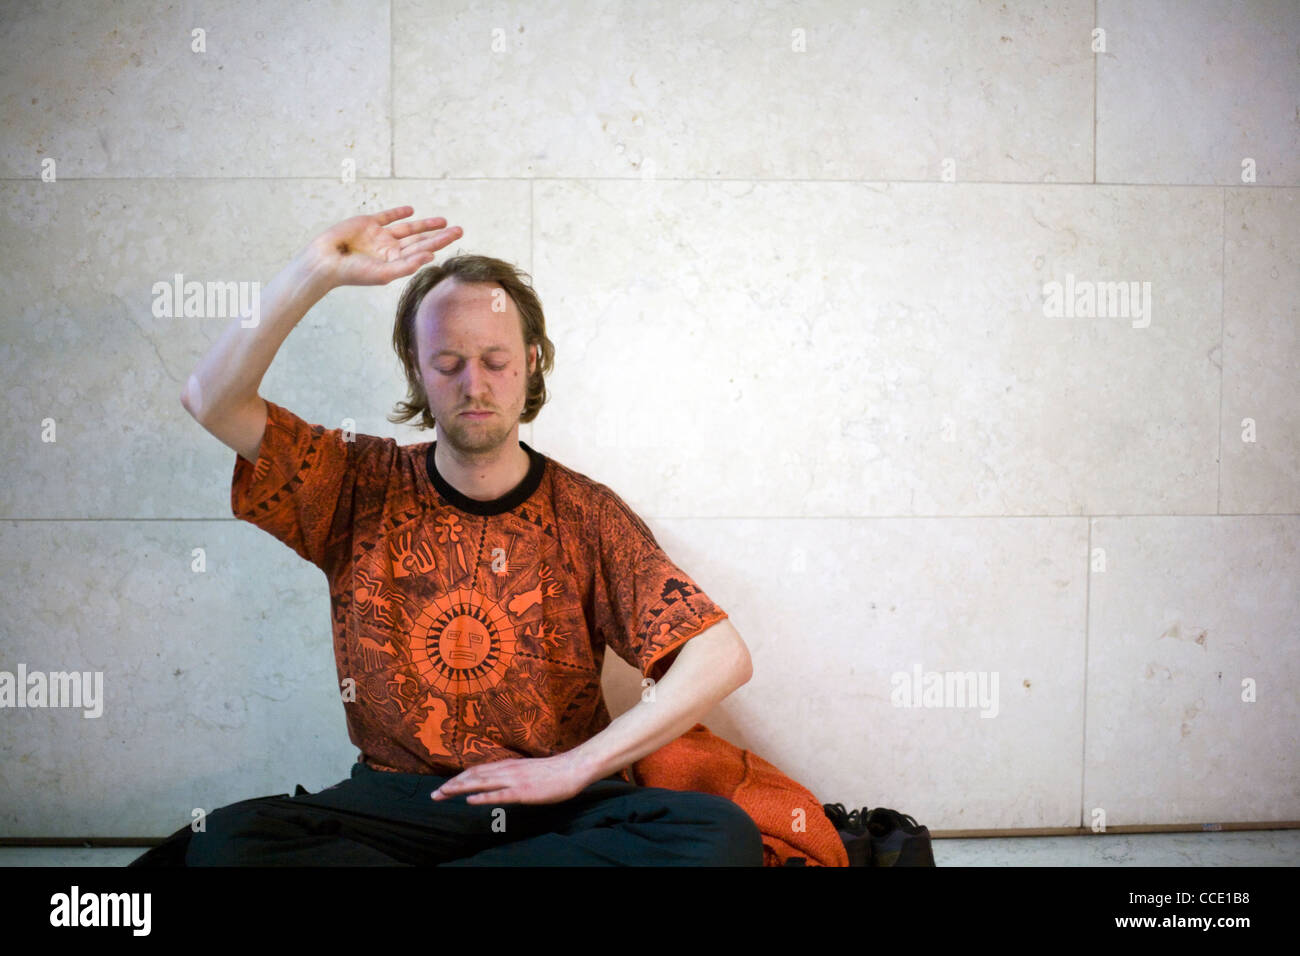 A man performs qi gong exercises as part of a meditation flash mob in the Great Court of the British Museum Stock Photo